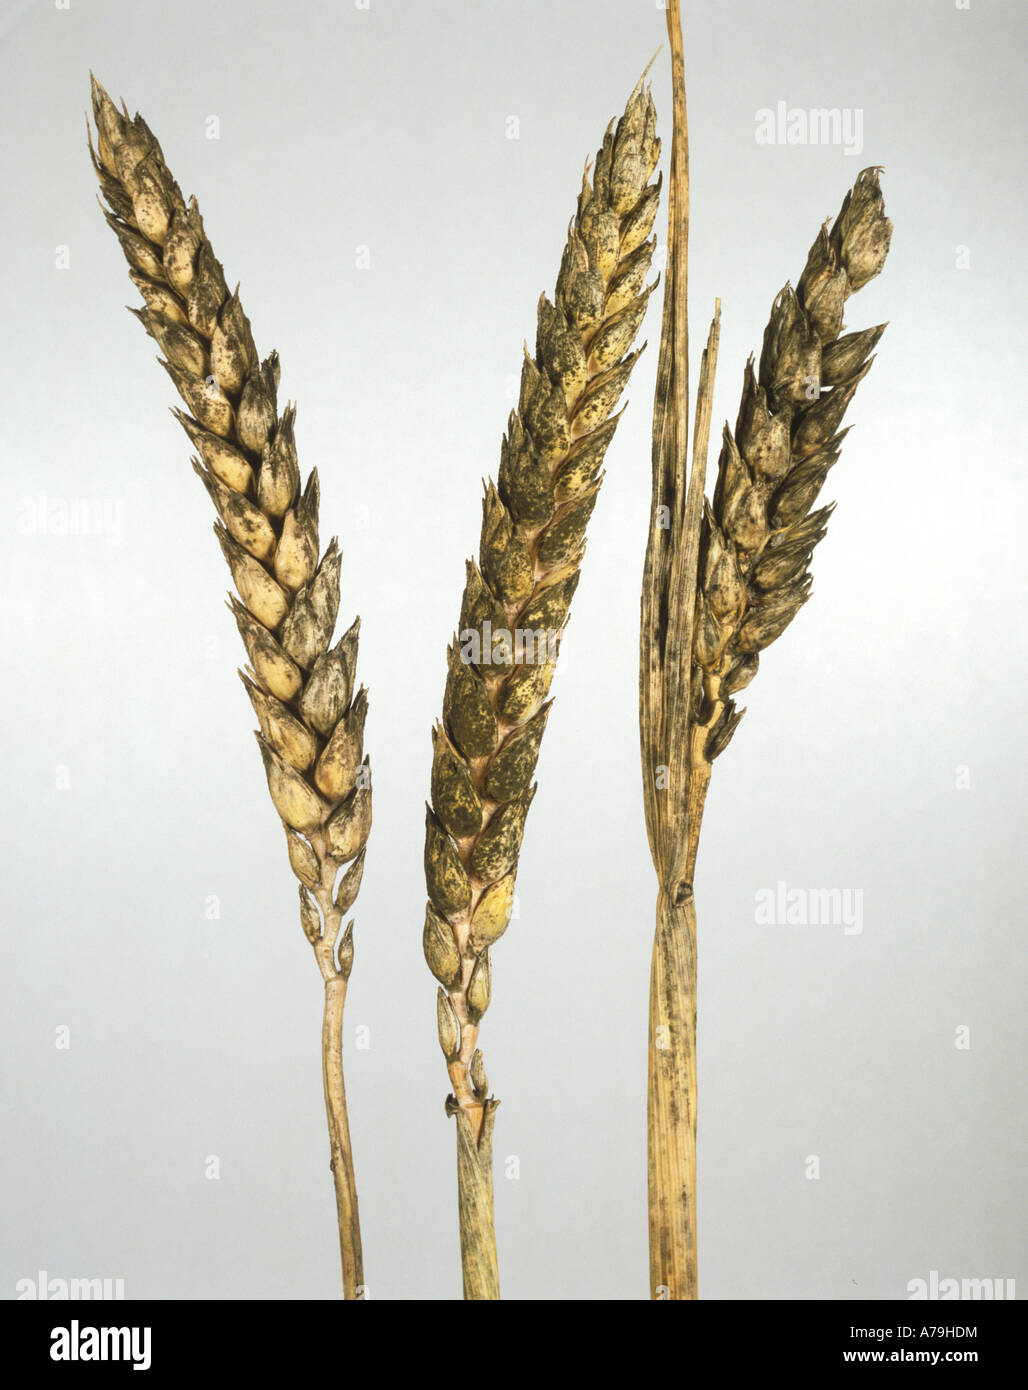 Sooty mould Cladosporium herbarum on ripe wheat ears at harvest Stock Photo